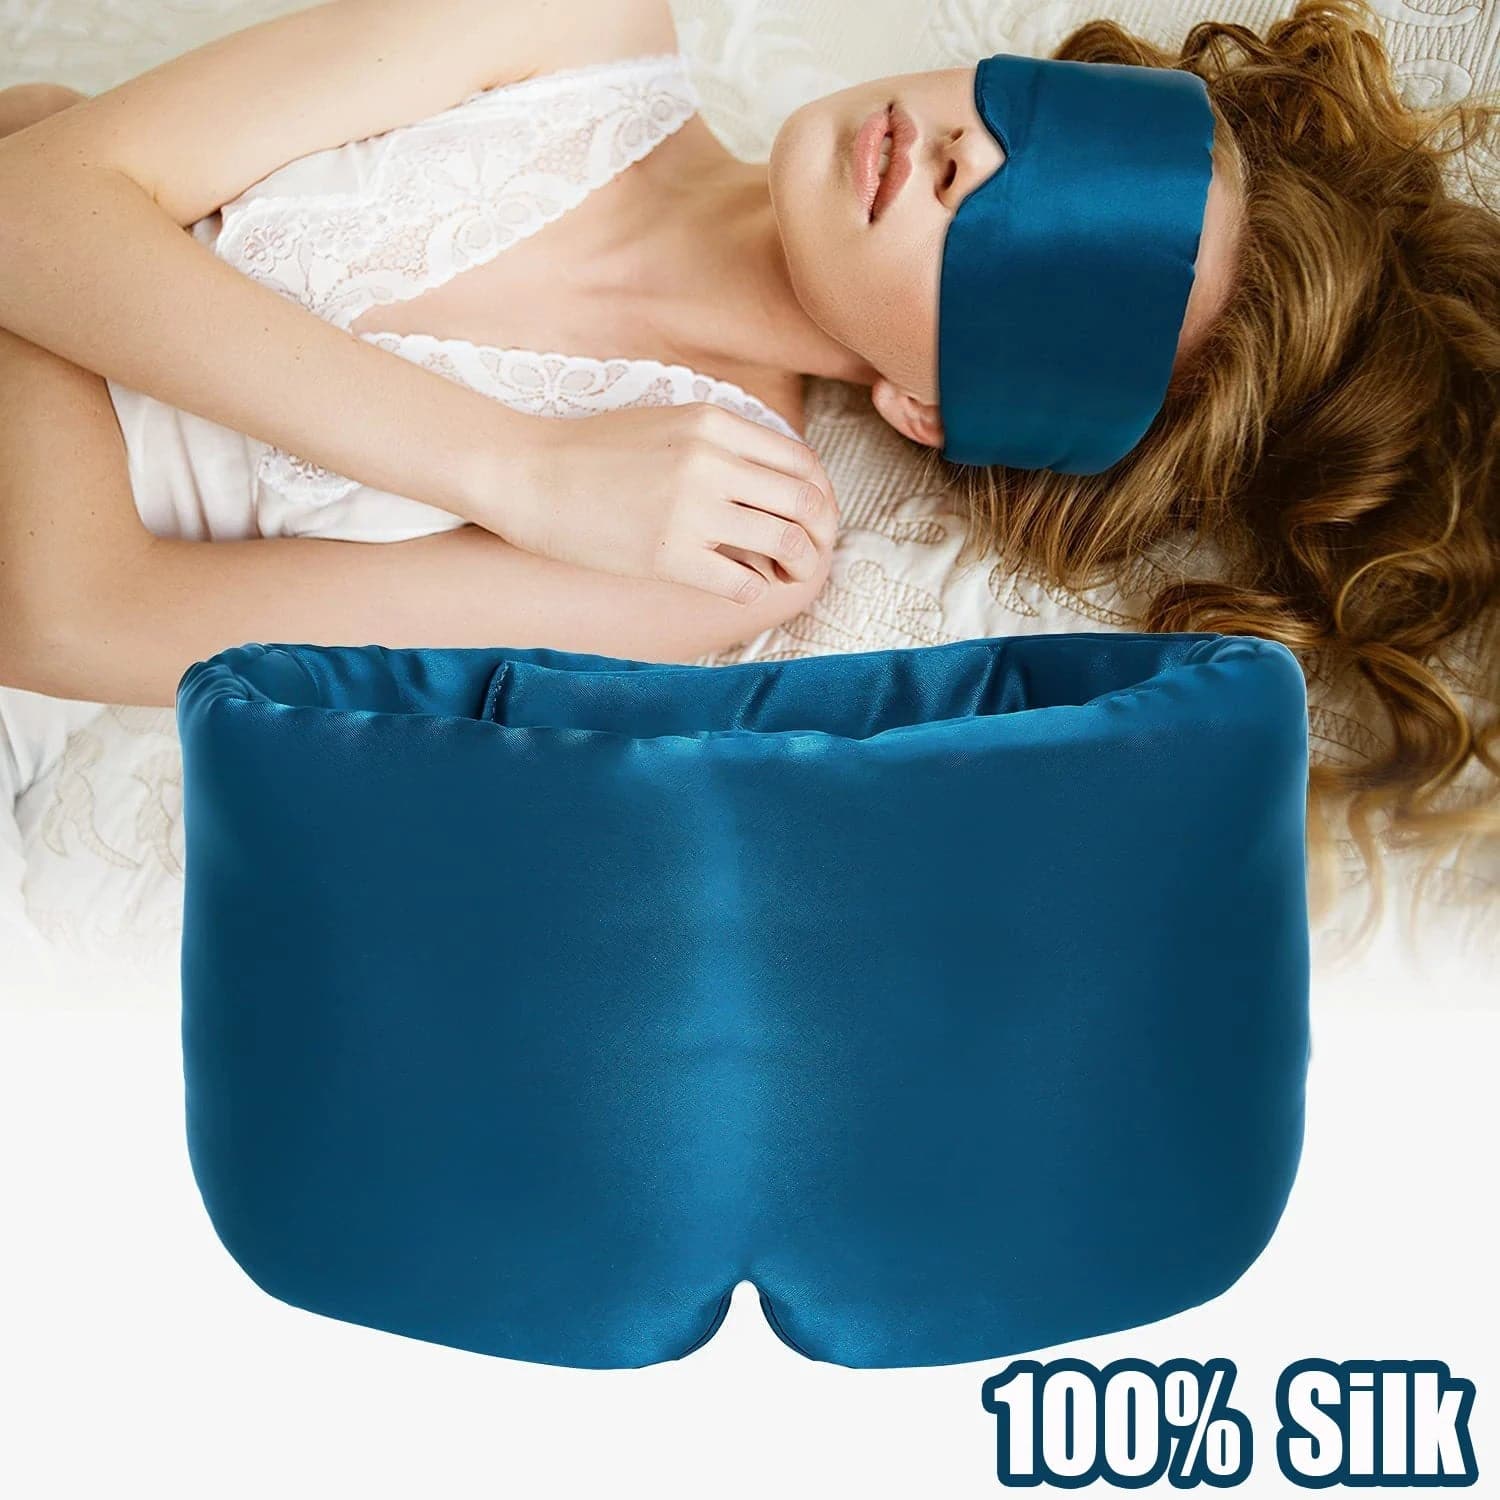 Mulberry Silk Sleeping Mask for Ultimate Comfort and Relaxation - Wandering Woman